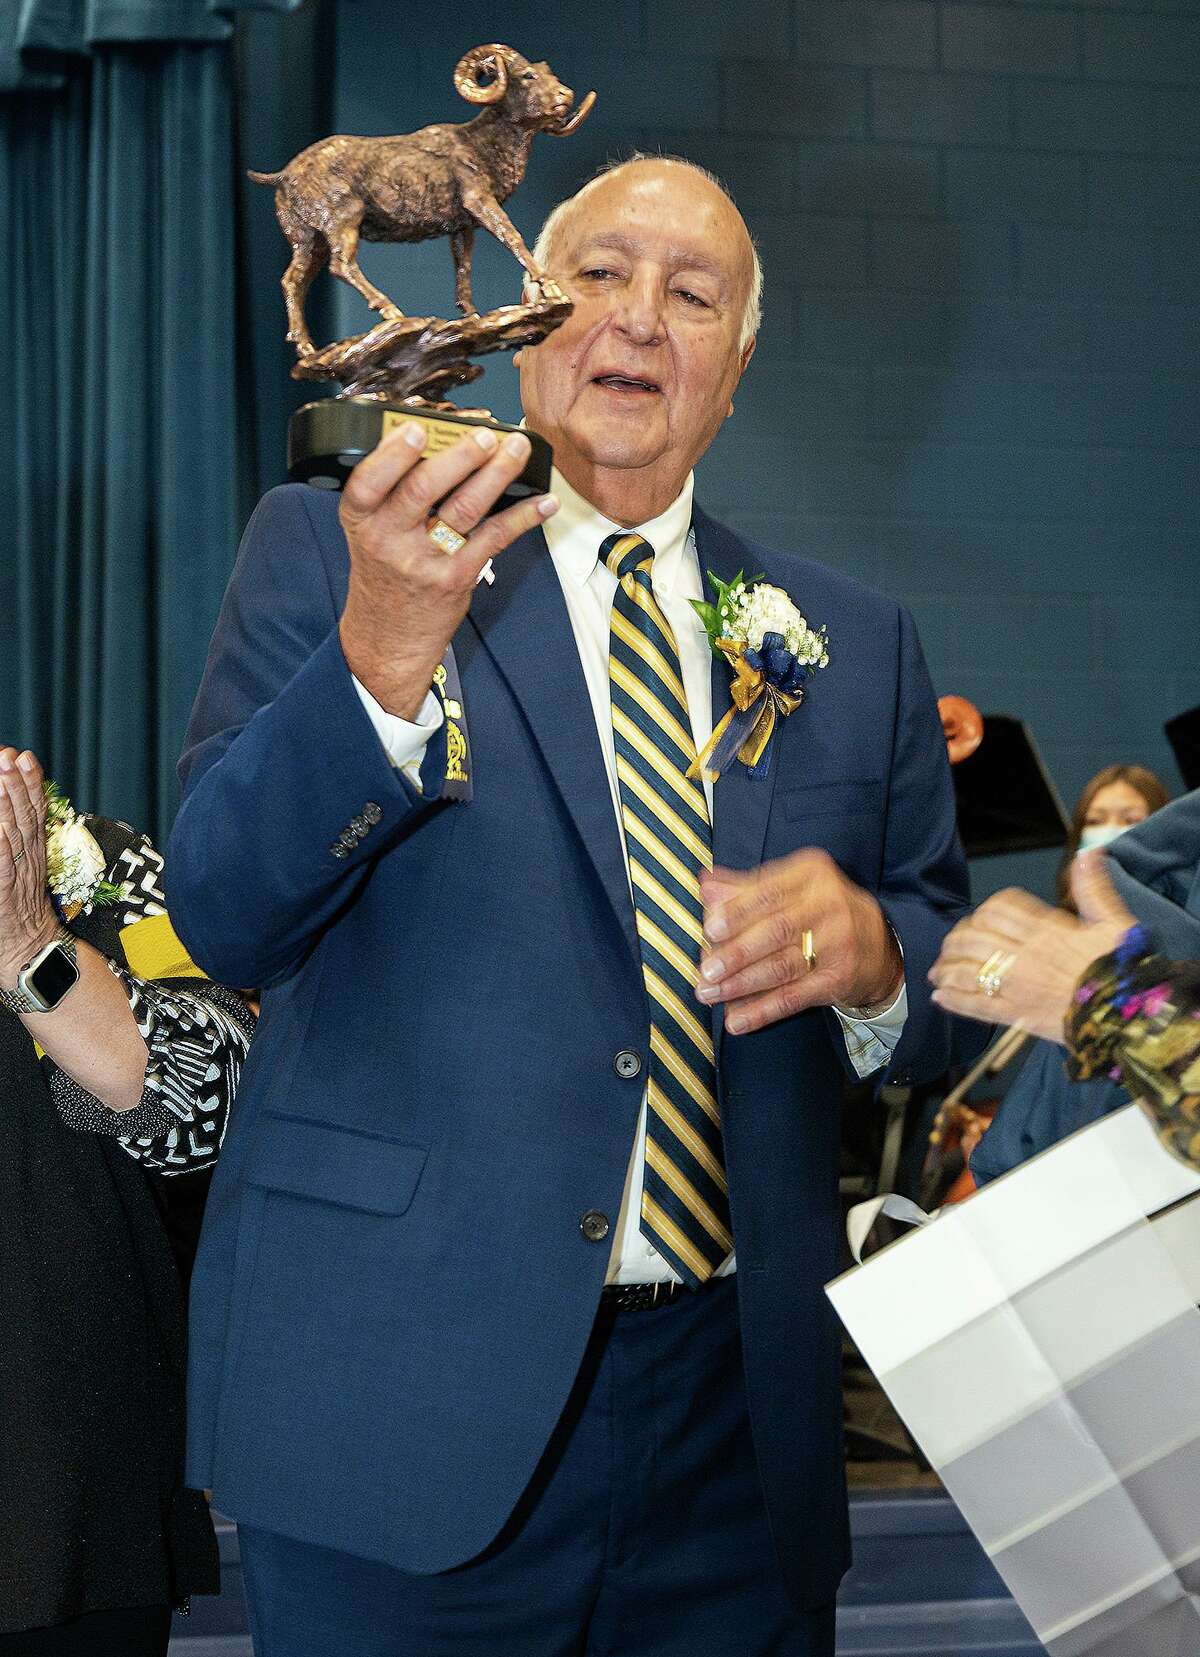 Former UISD Superintendent Robert J. Santos is gift a statuette of a ram, the mascot of Robert J. Santos Elementary School, Friday, Oct. 15, 2021, during a dedication ceremony for the school.